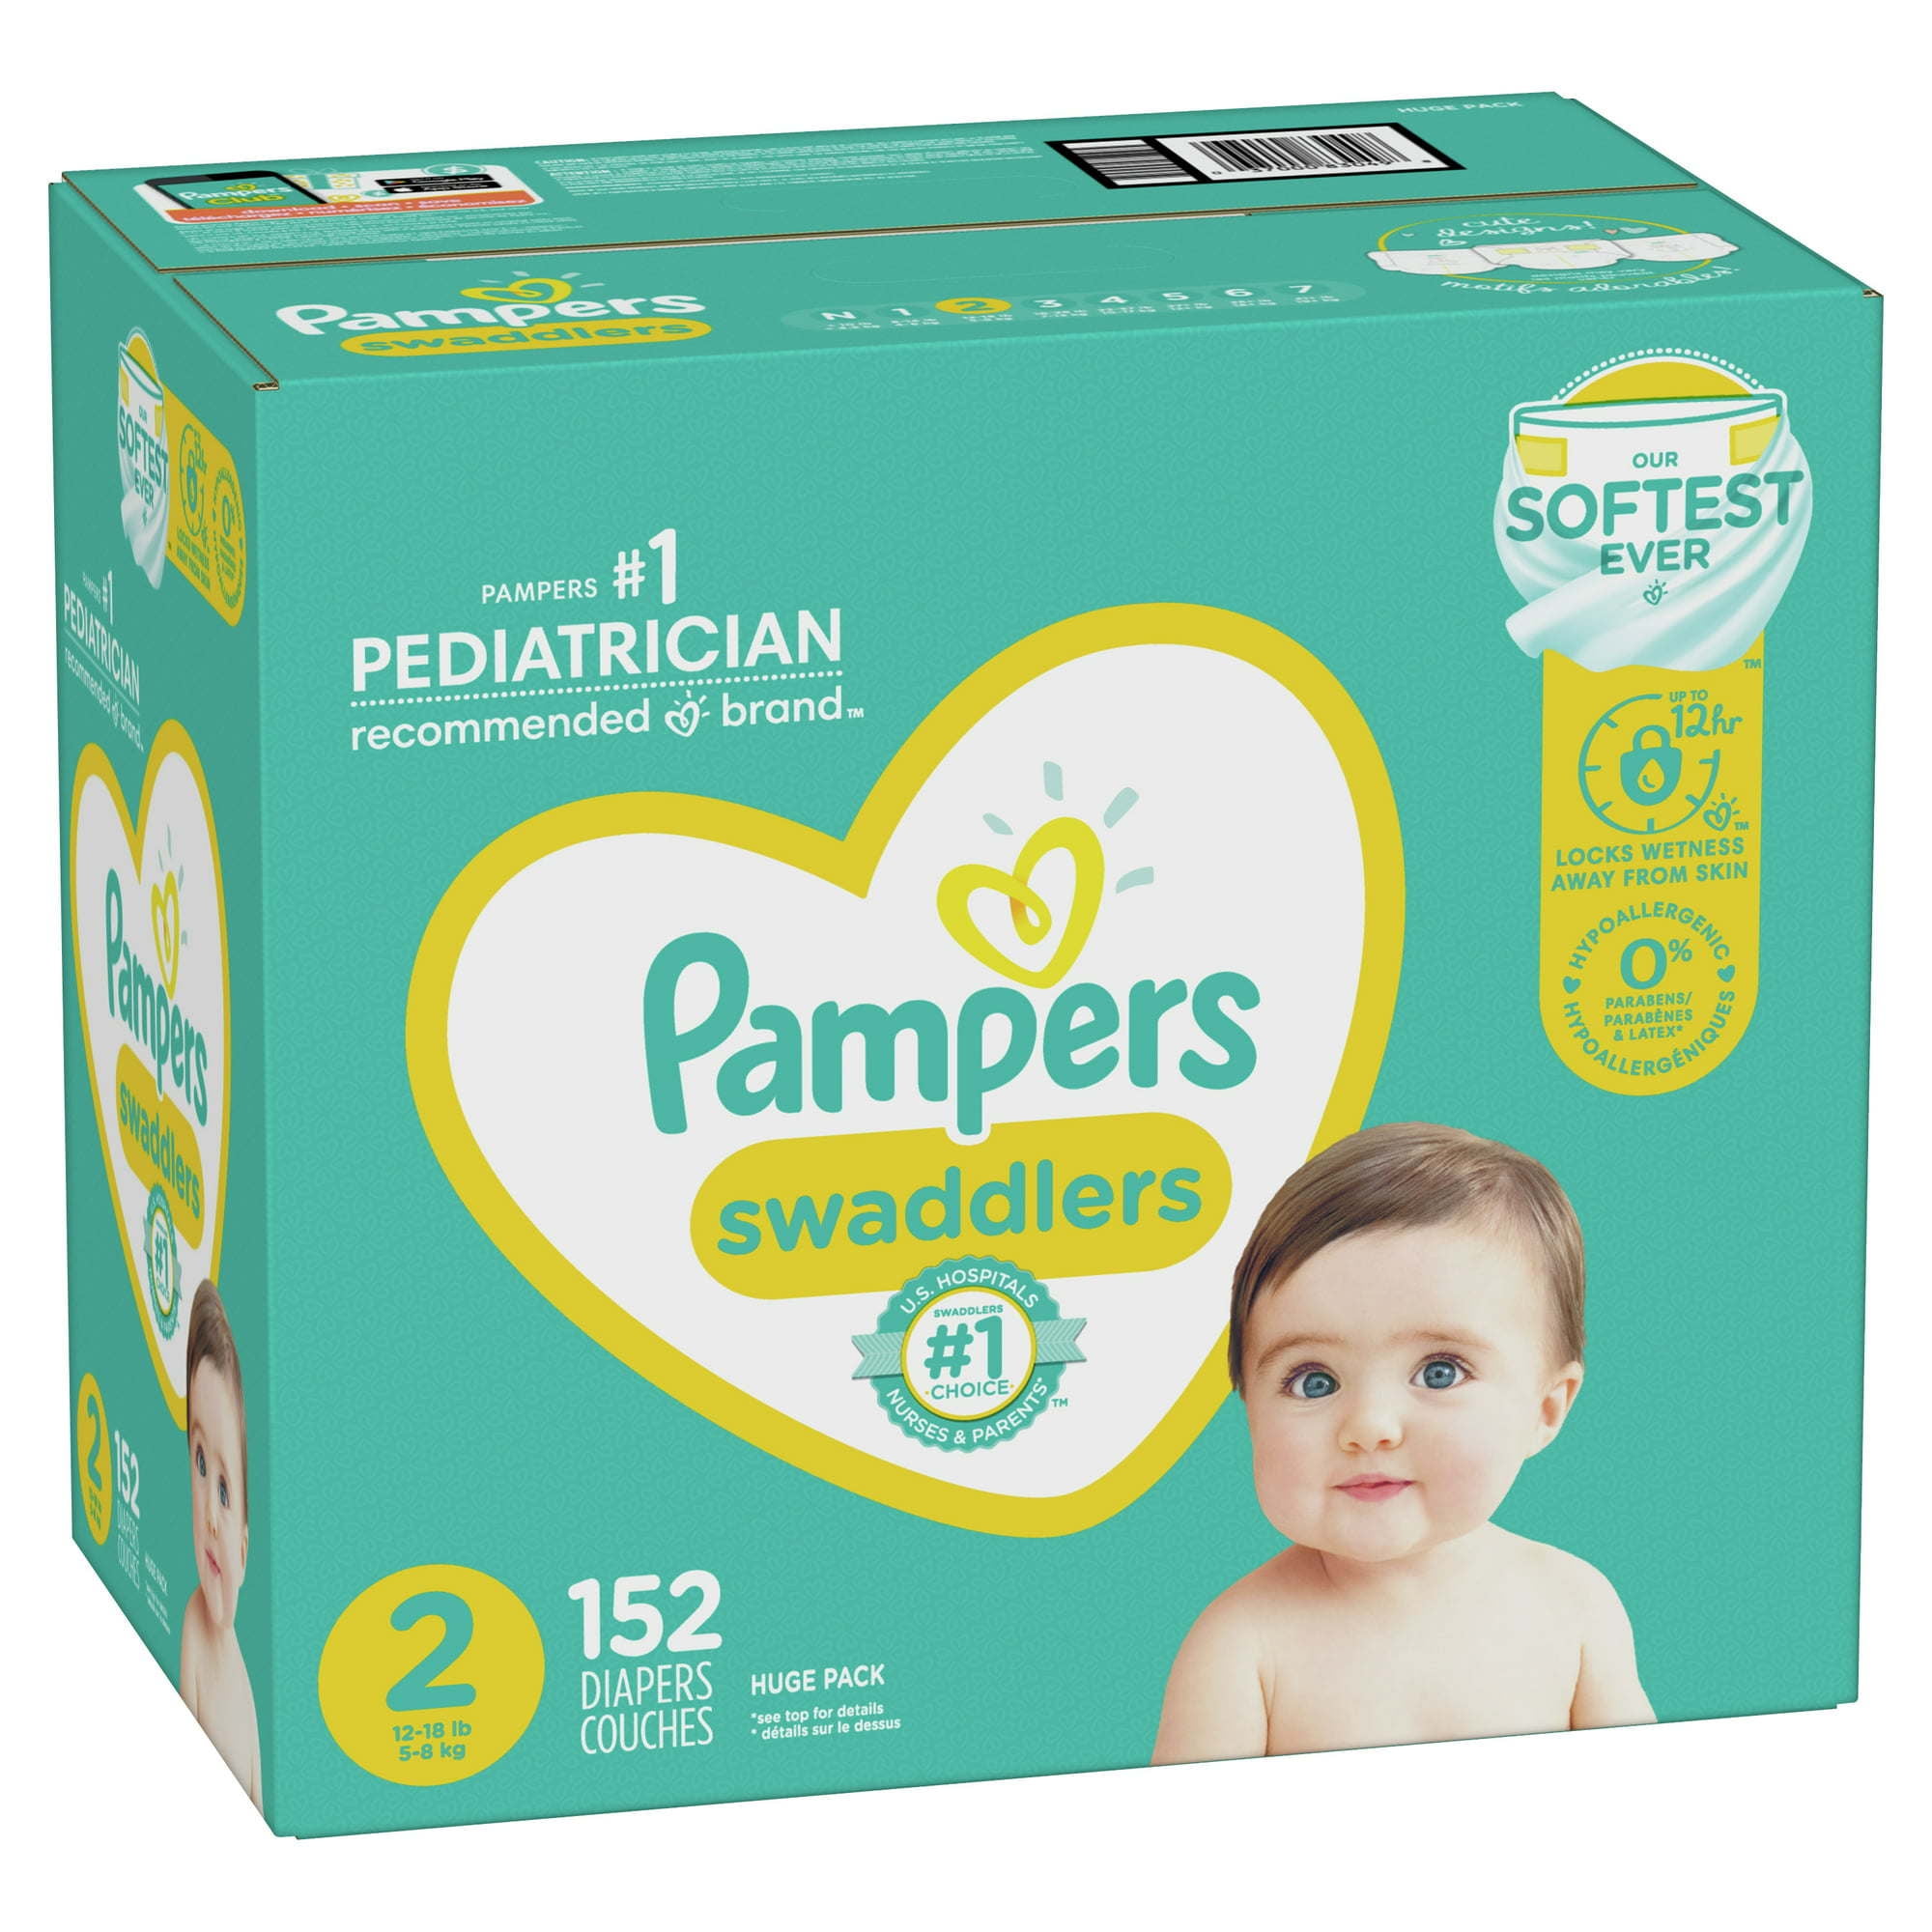 Pañales Pampers Swaddlers Talla 4, 150 unidades – Baby Junior Shop